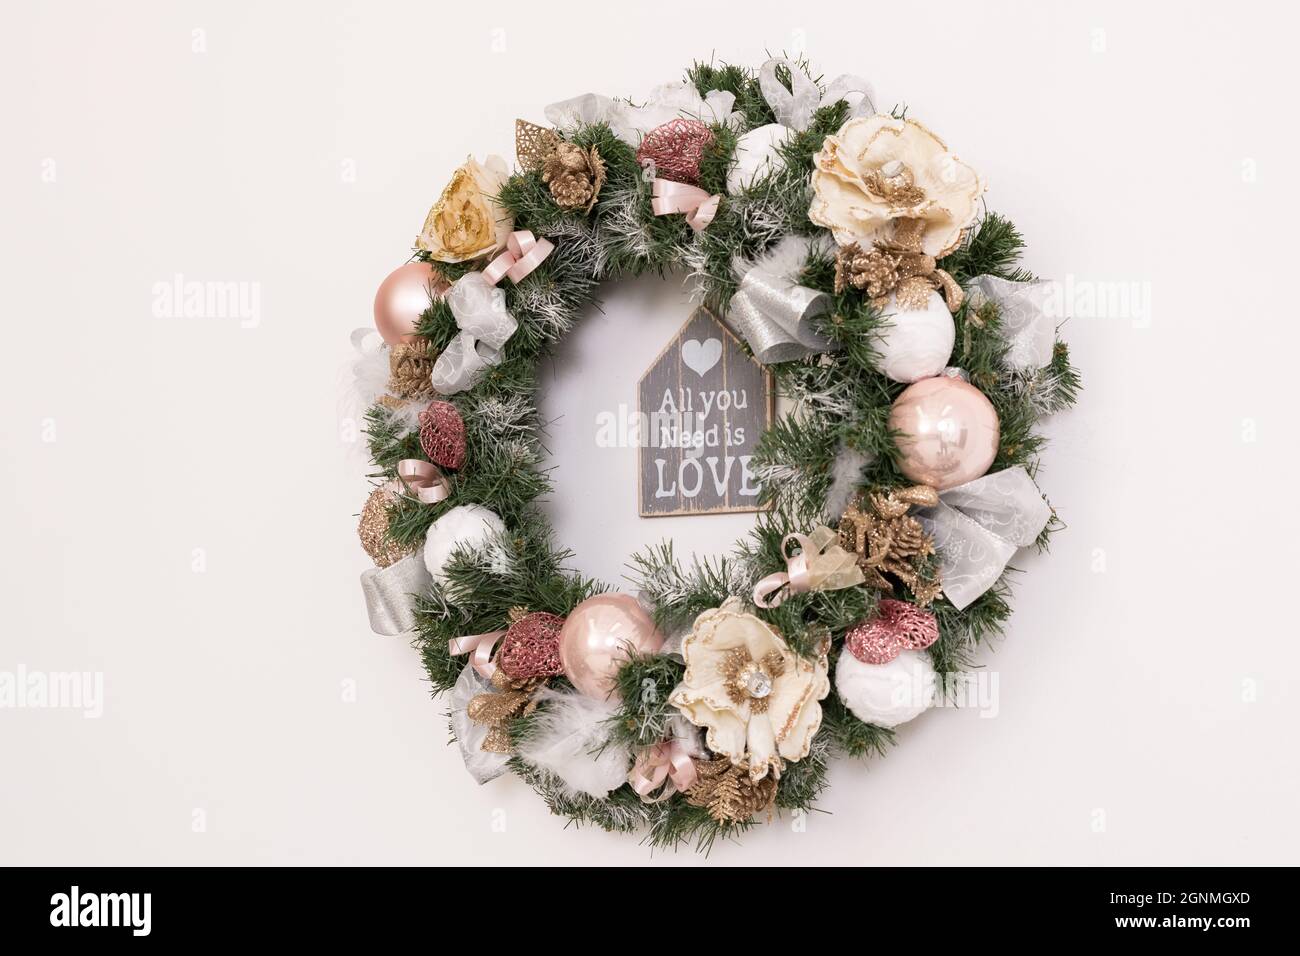 A Christmas wreath hangs on the wall photo at an angle Stock Photo